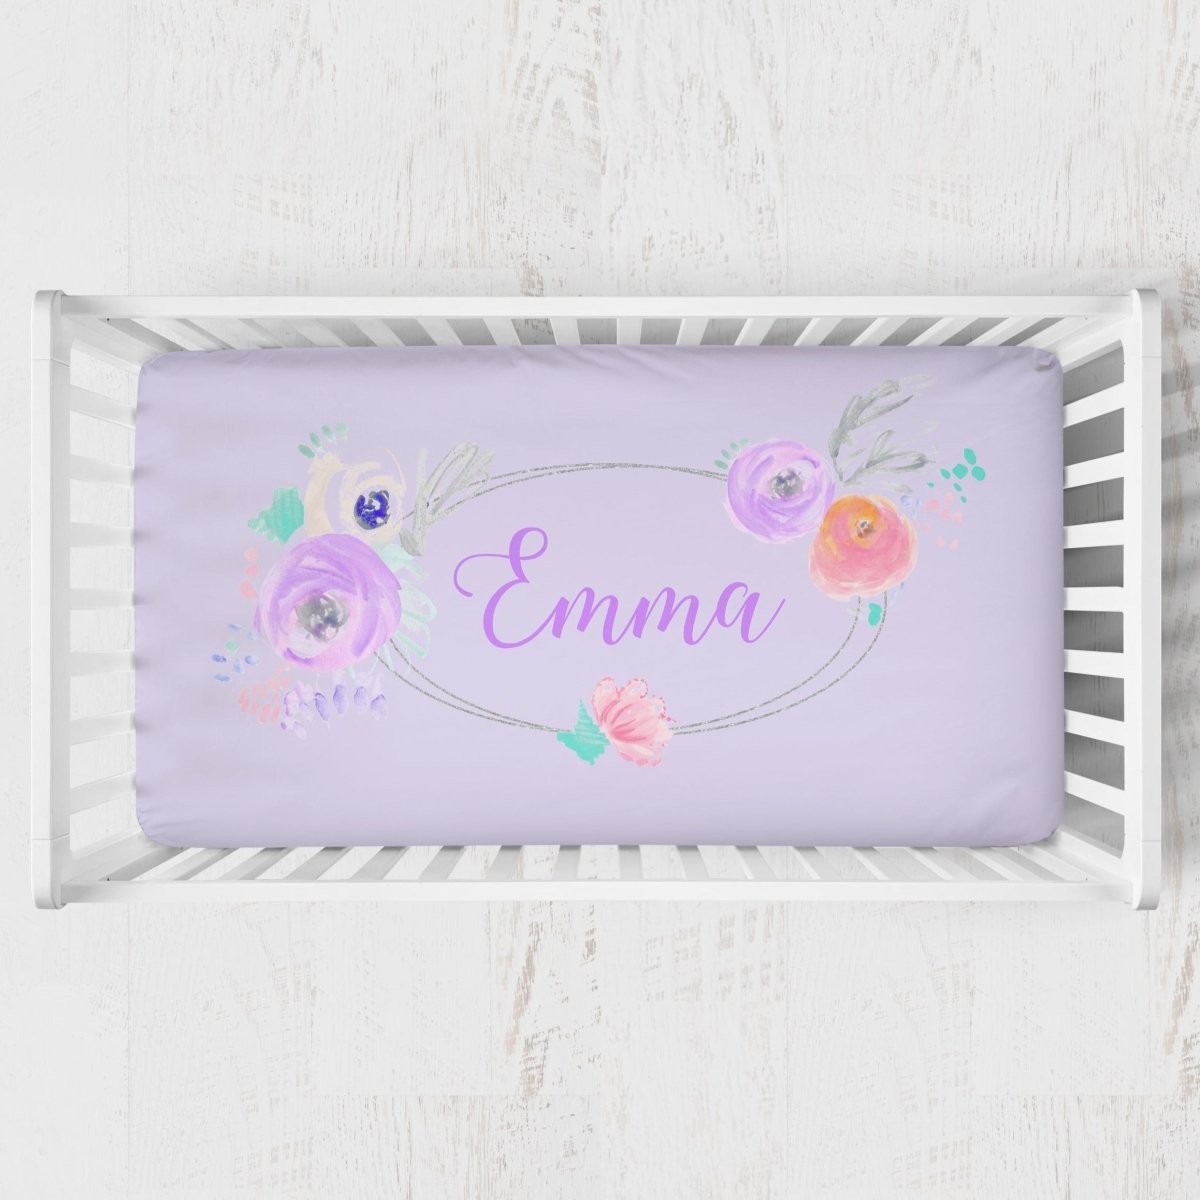 Purple Blooms Personalized Crib Sheet - gender_girl, Personalized_Yes, text